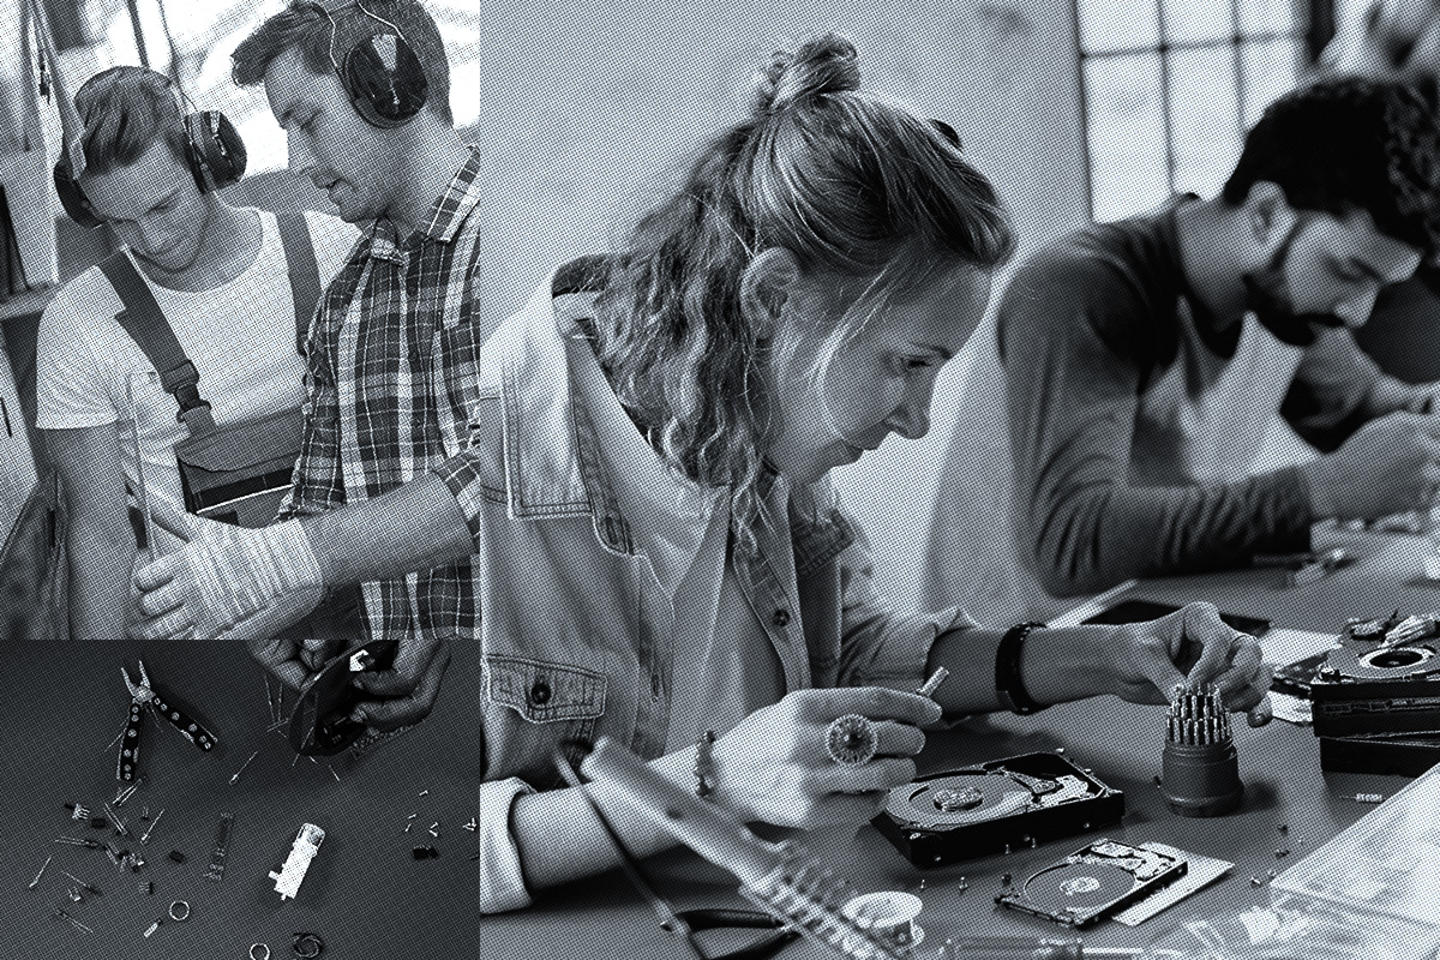 Three black-and-white photos showing different tasks, including electronics repair.